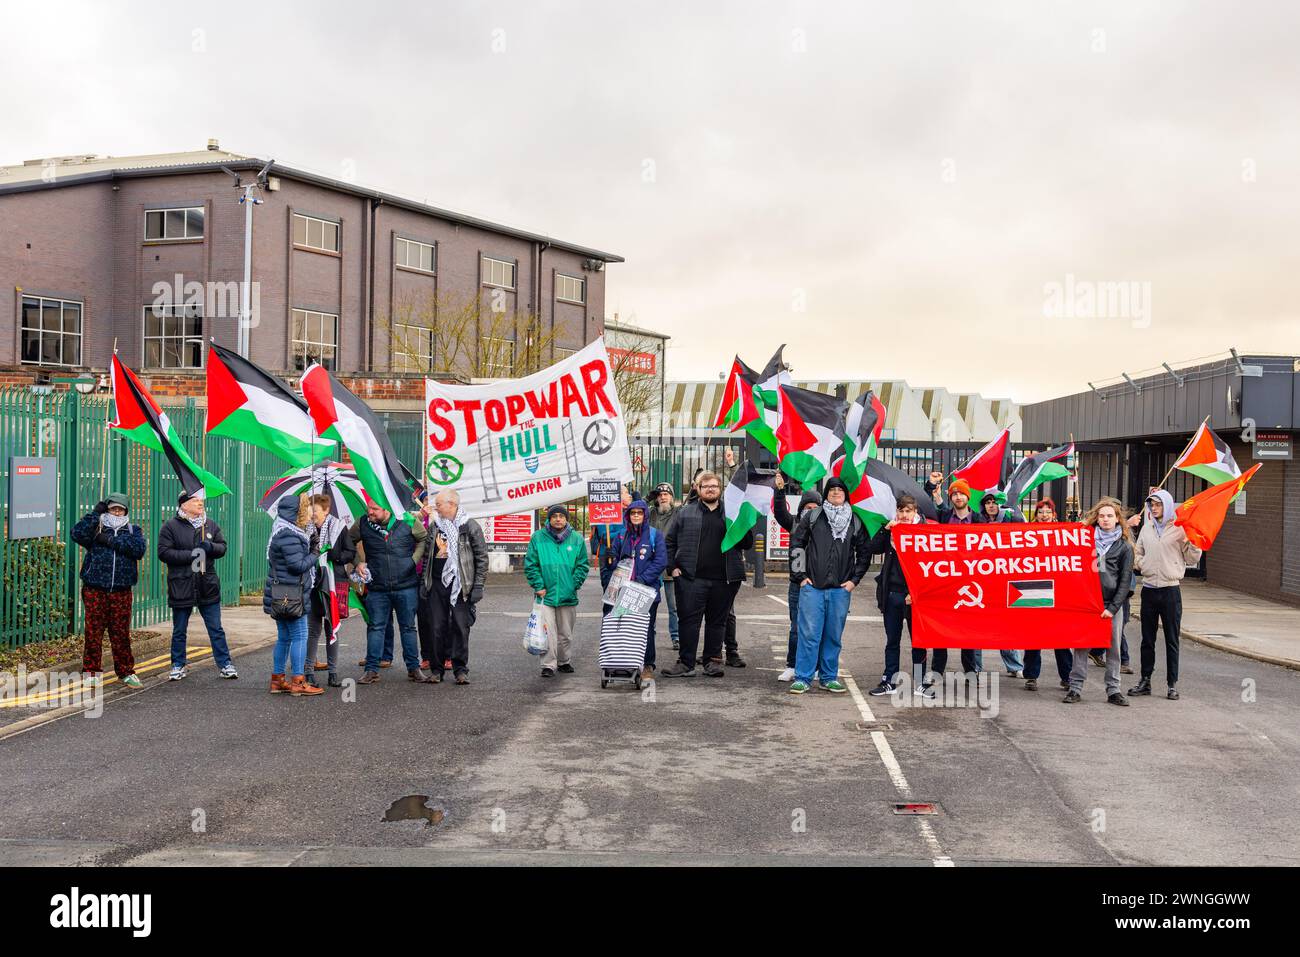 Brough, UK. 02 MAR, 2024. Gathered Pro Palestinian protestors line up outside the gates of the BAE factory in Brough, part of the Humber Enterprise Park, they can be seen holding both Palestine and Communist Party of Great Britain flag and various banners. Story: A protest organised by members of the Young Communist League outside the BAE systems factory in Brough, 12 miles West of Hull. The factory was used in the development of the F-35 aircraft used by Israeli government. Around 33 protestors no arrests. Credit Milo Chandler/Alamy Live News Stock Photo